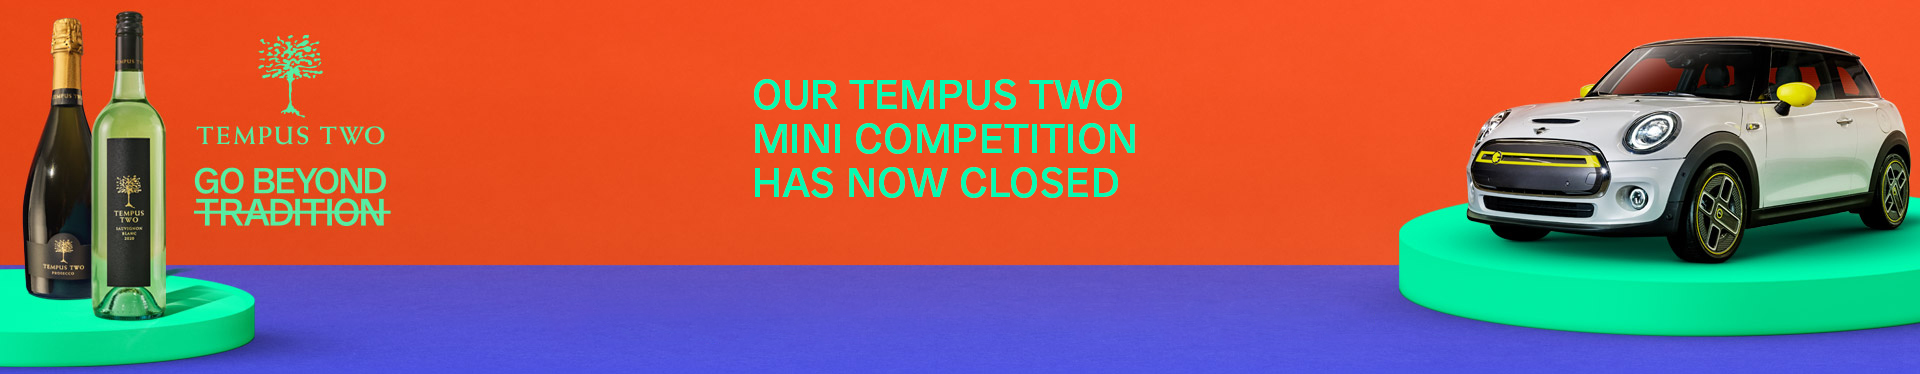 Tempus Two Mini Hatch Competition is now closed